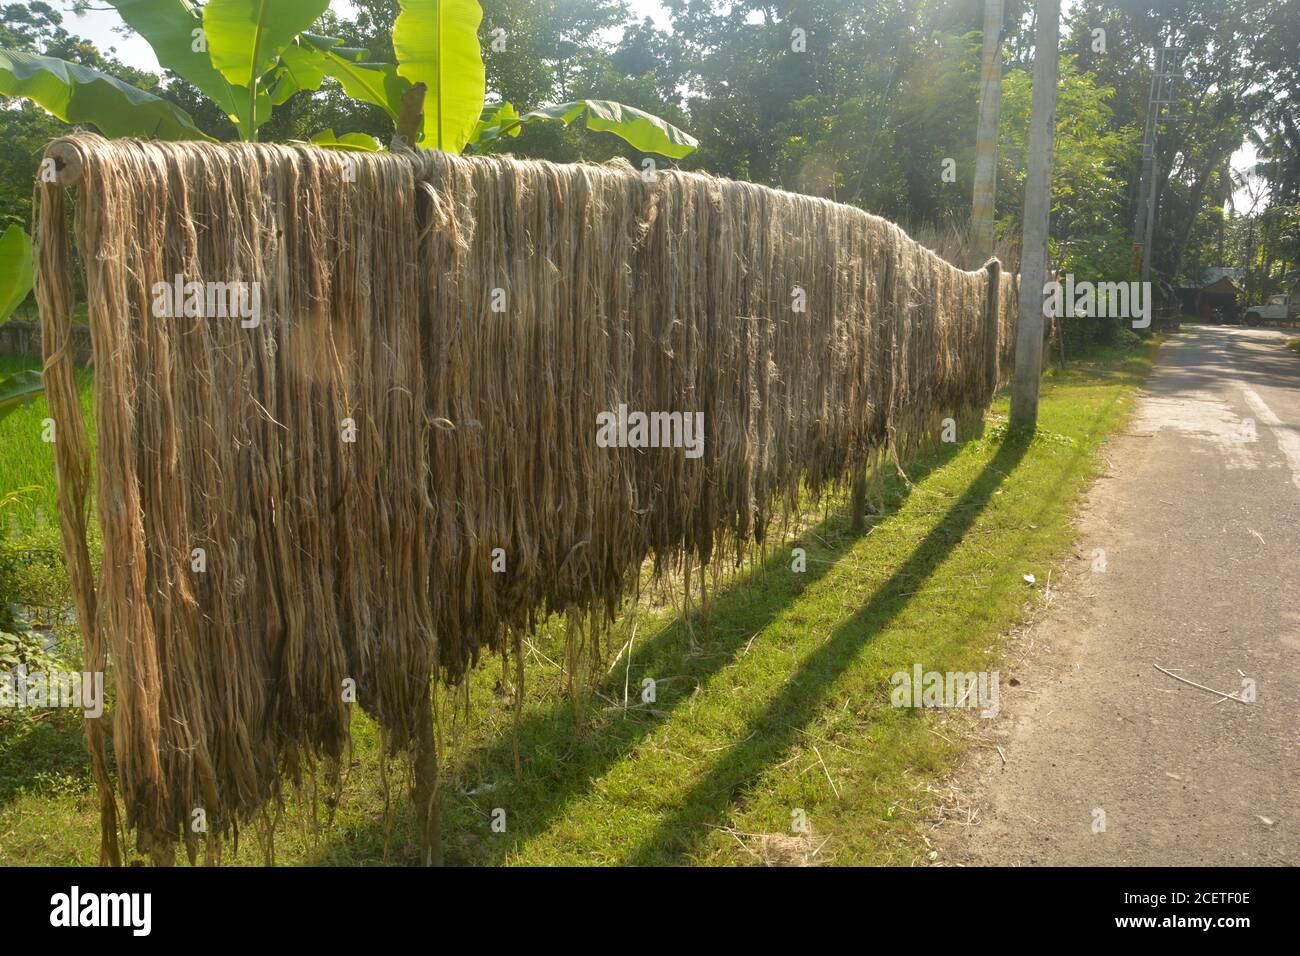 Jute fibers, fabric hanging on long bamboo poles in day light for drying on a village road side, selective focusing Stock Photo